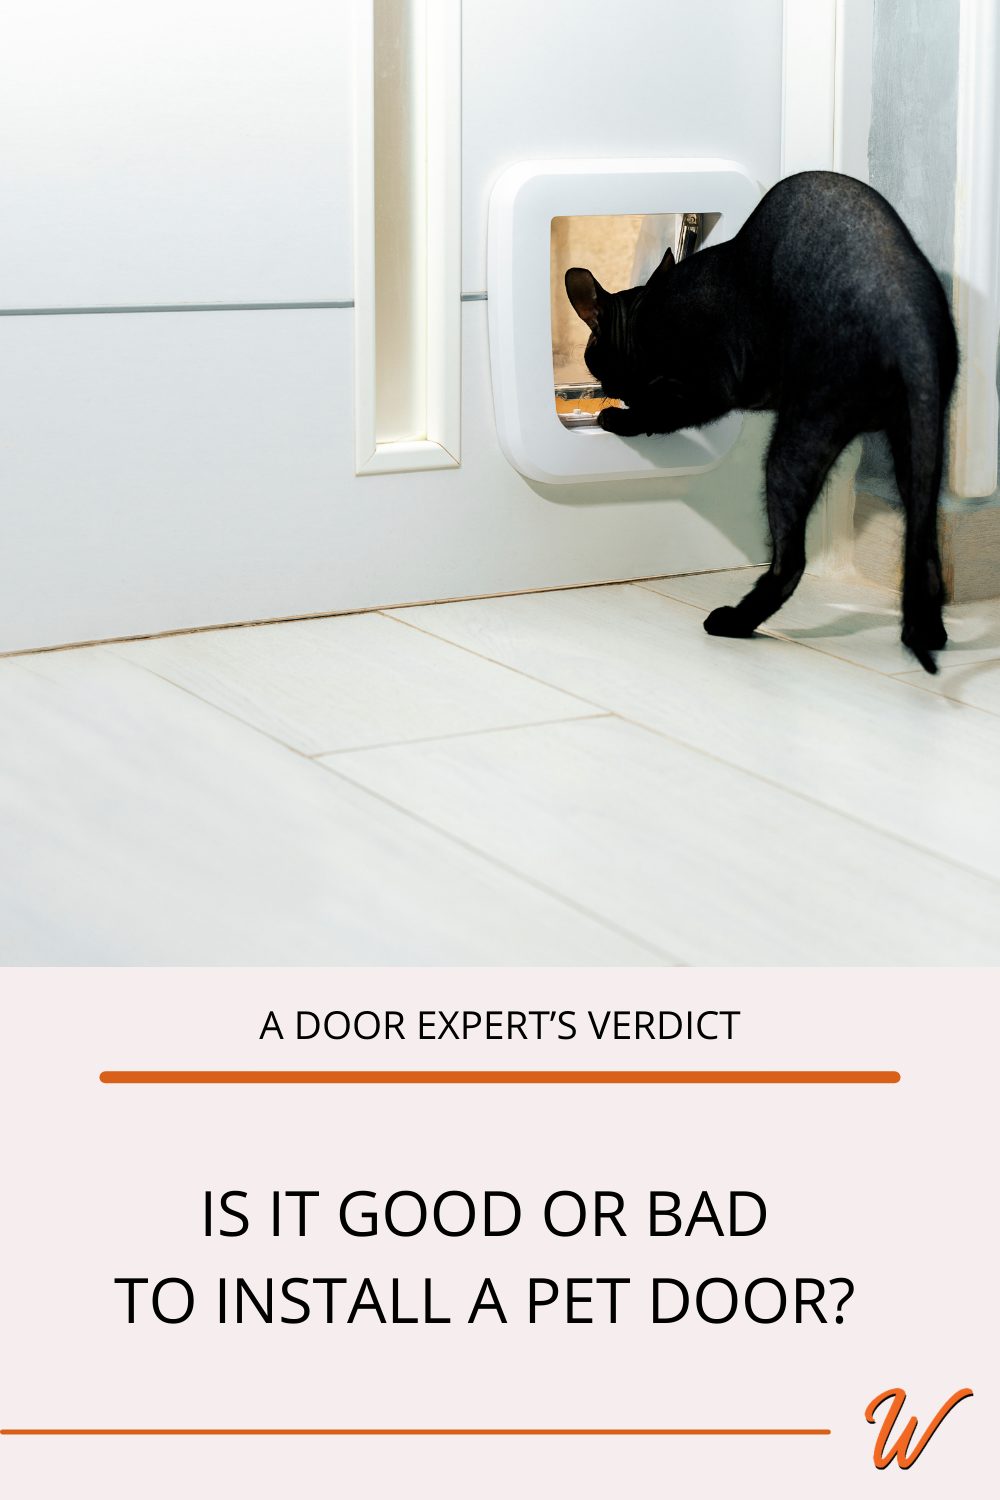 a black cat goes through a pet door in a modern home. The image is captioned with "A door expert's verdict: Is it good or bad to install a pet door?"